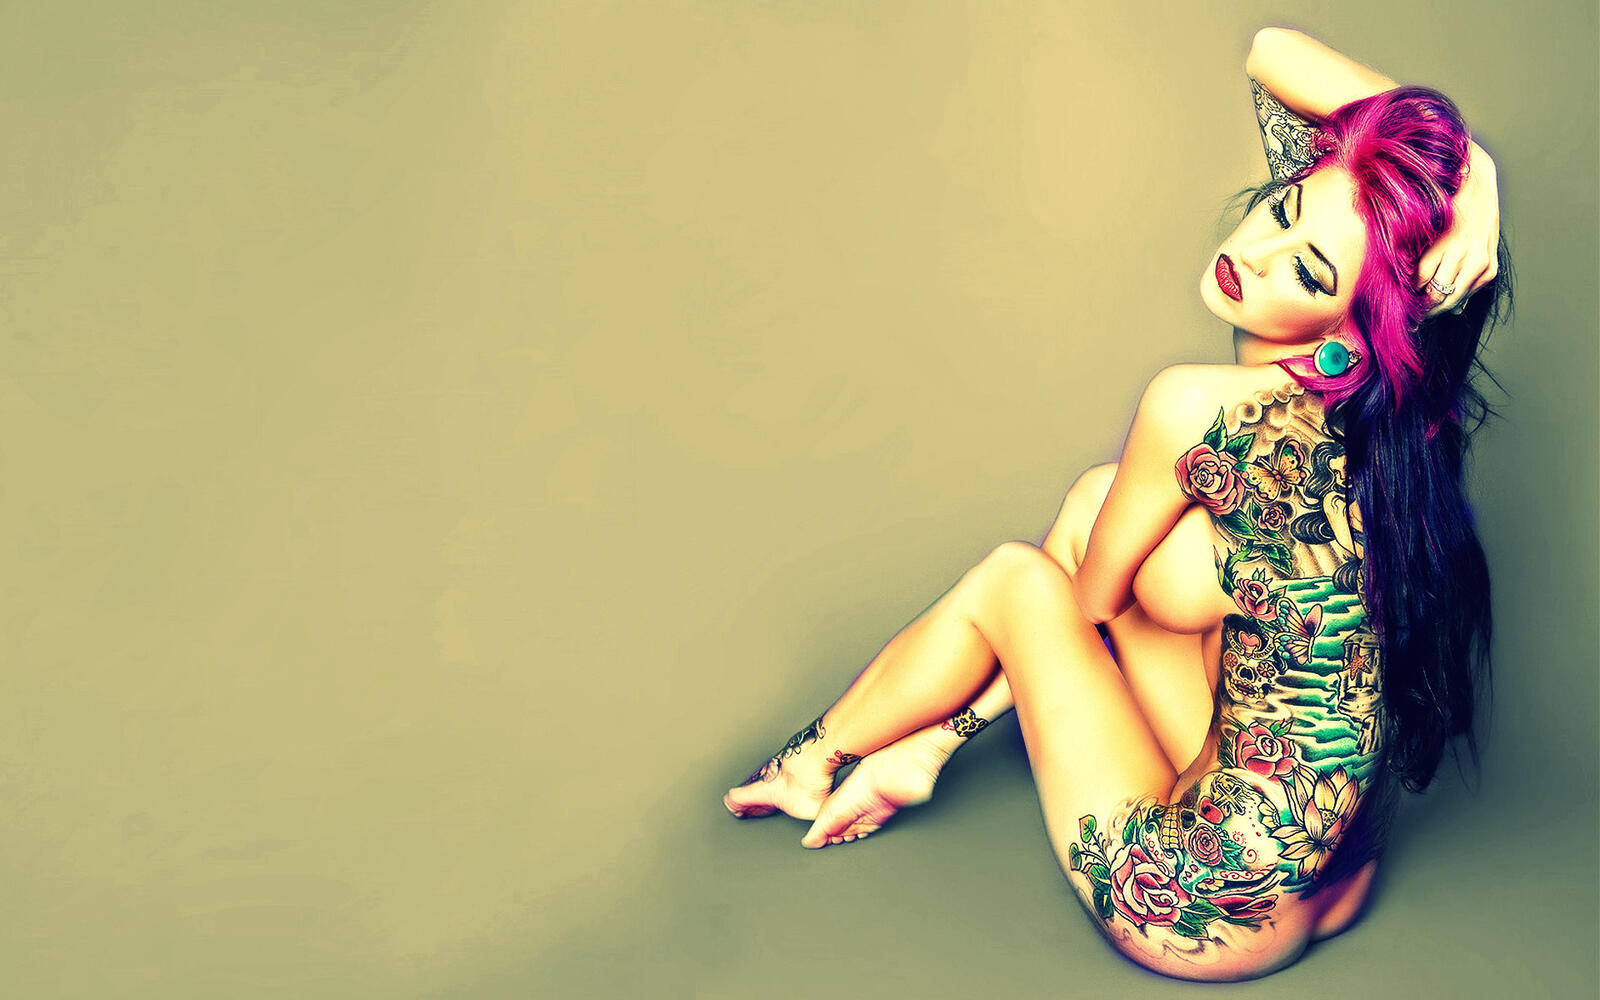 Wallpapers babes tattoo model on the desktop